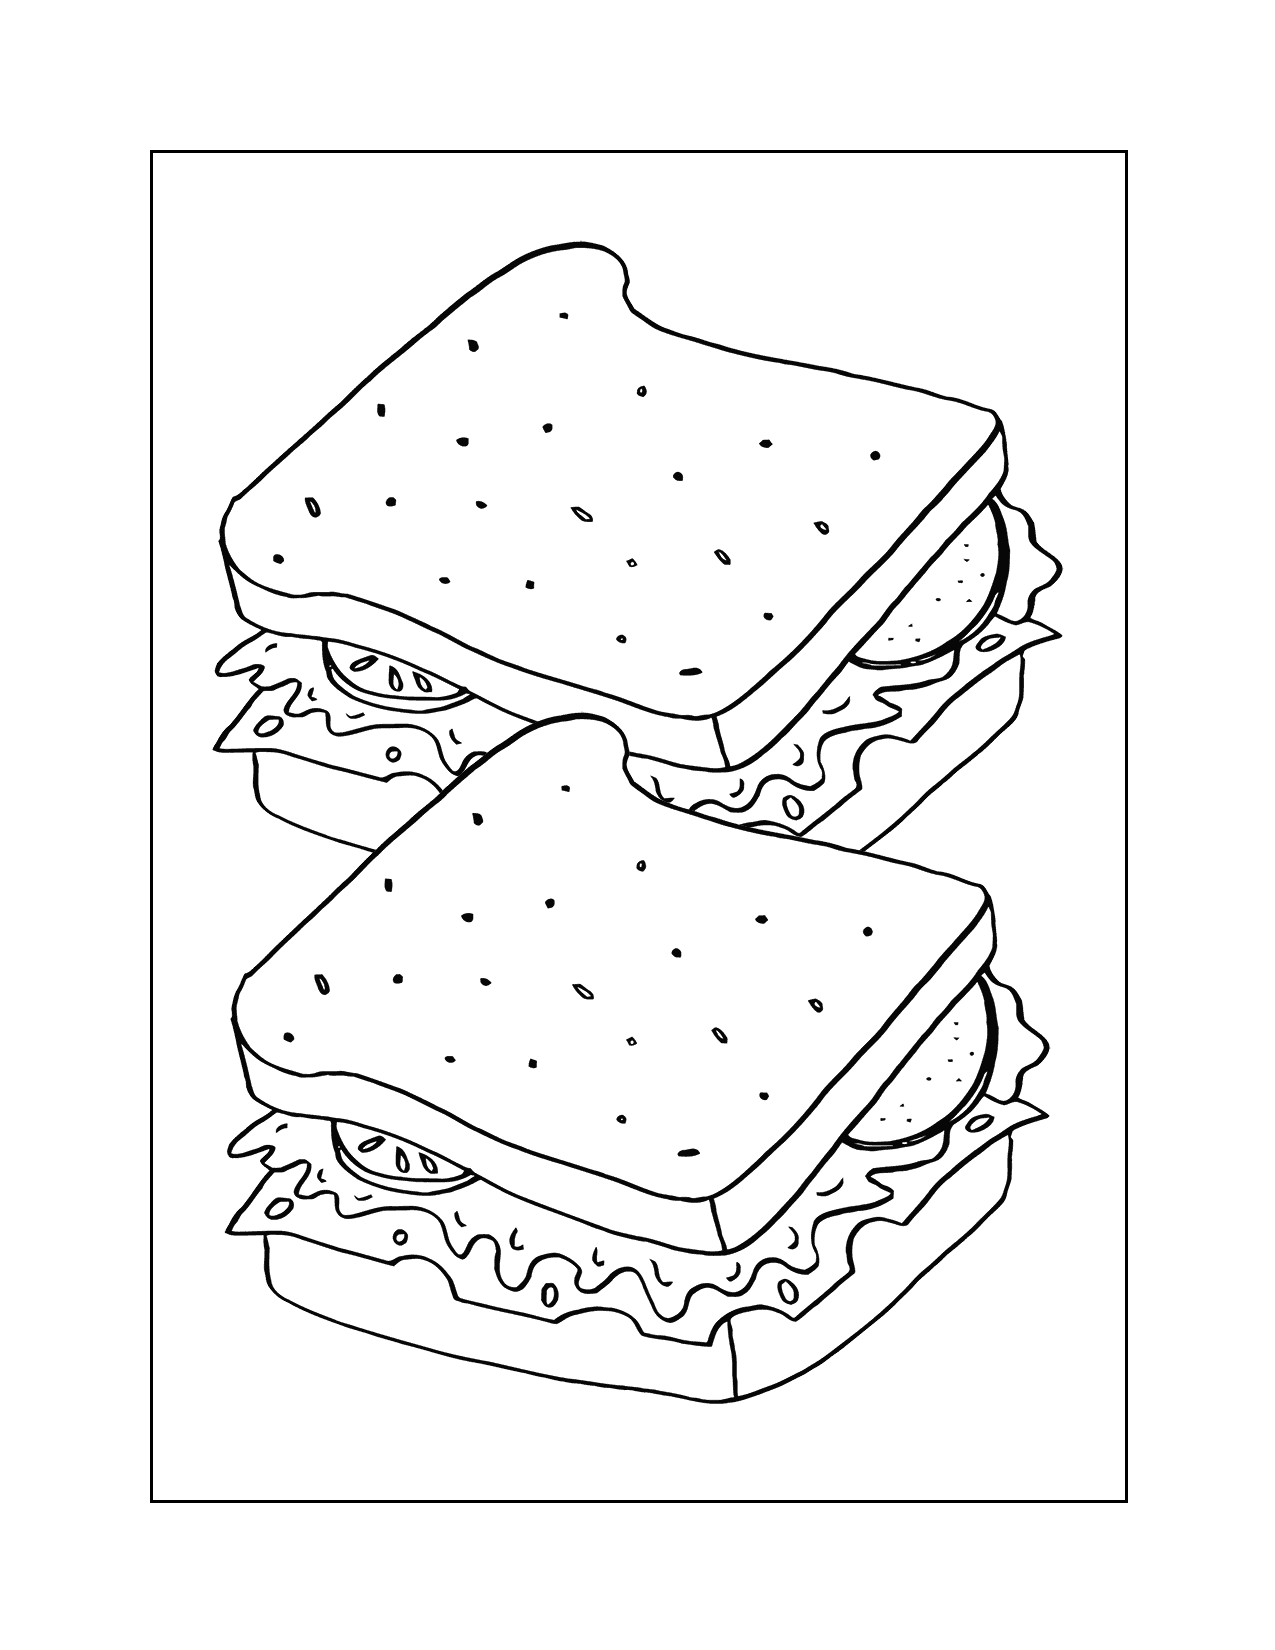 Two Sandwiches Coloring Page